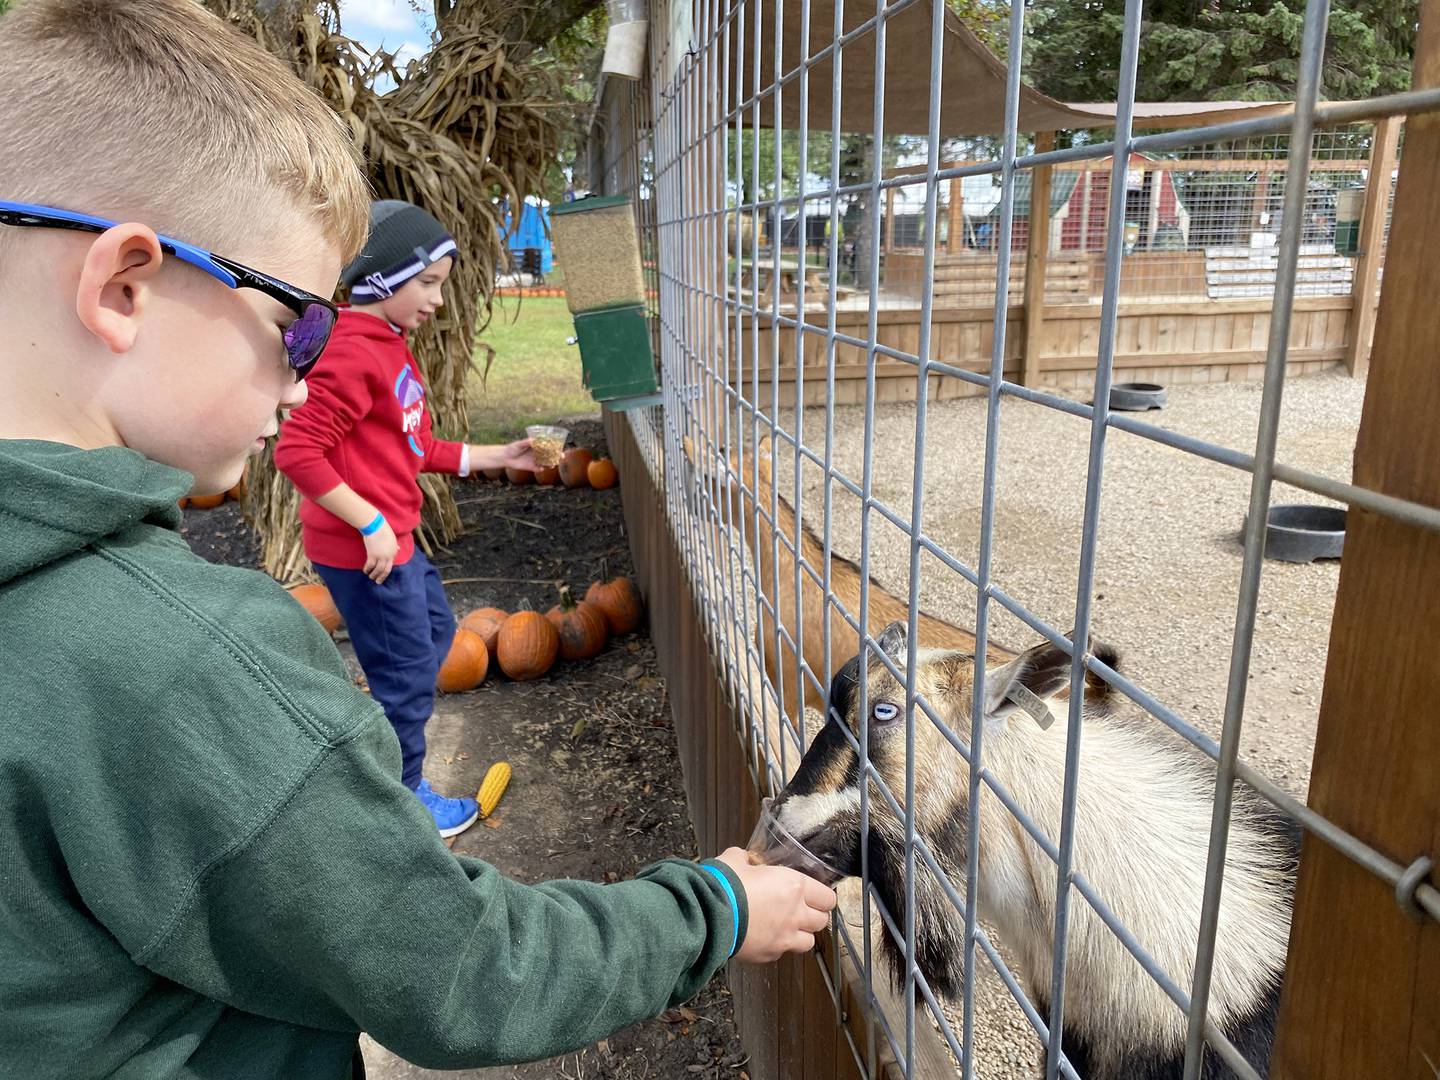 Jase Janczak, left, and his cousin Boone Finley feed goats on Sept. 24, 2022, inside the paid activity area at Jerry Smith Farm, 7150 18th St. in Kenosha.